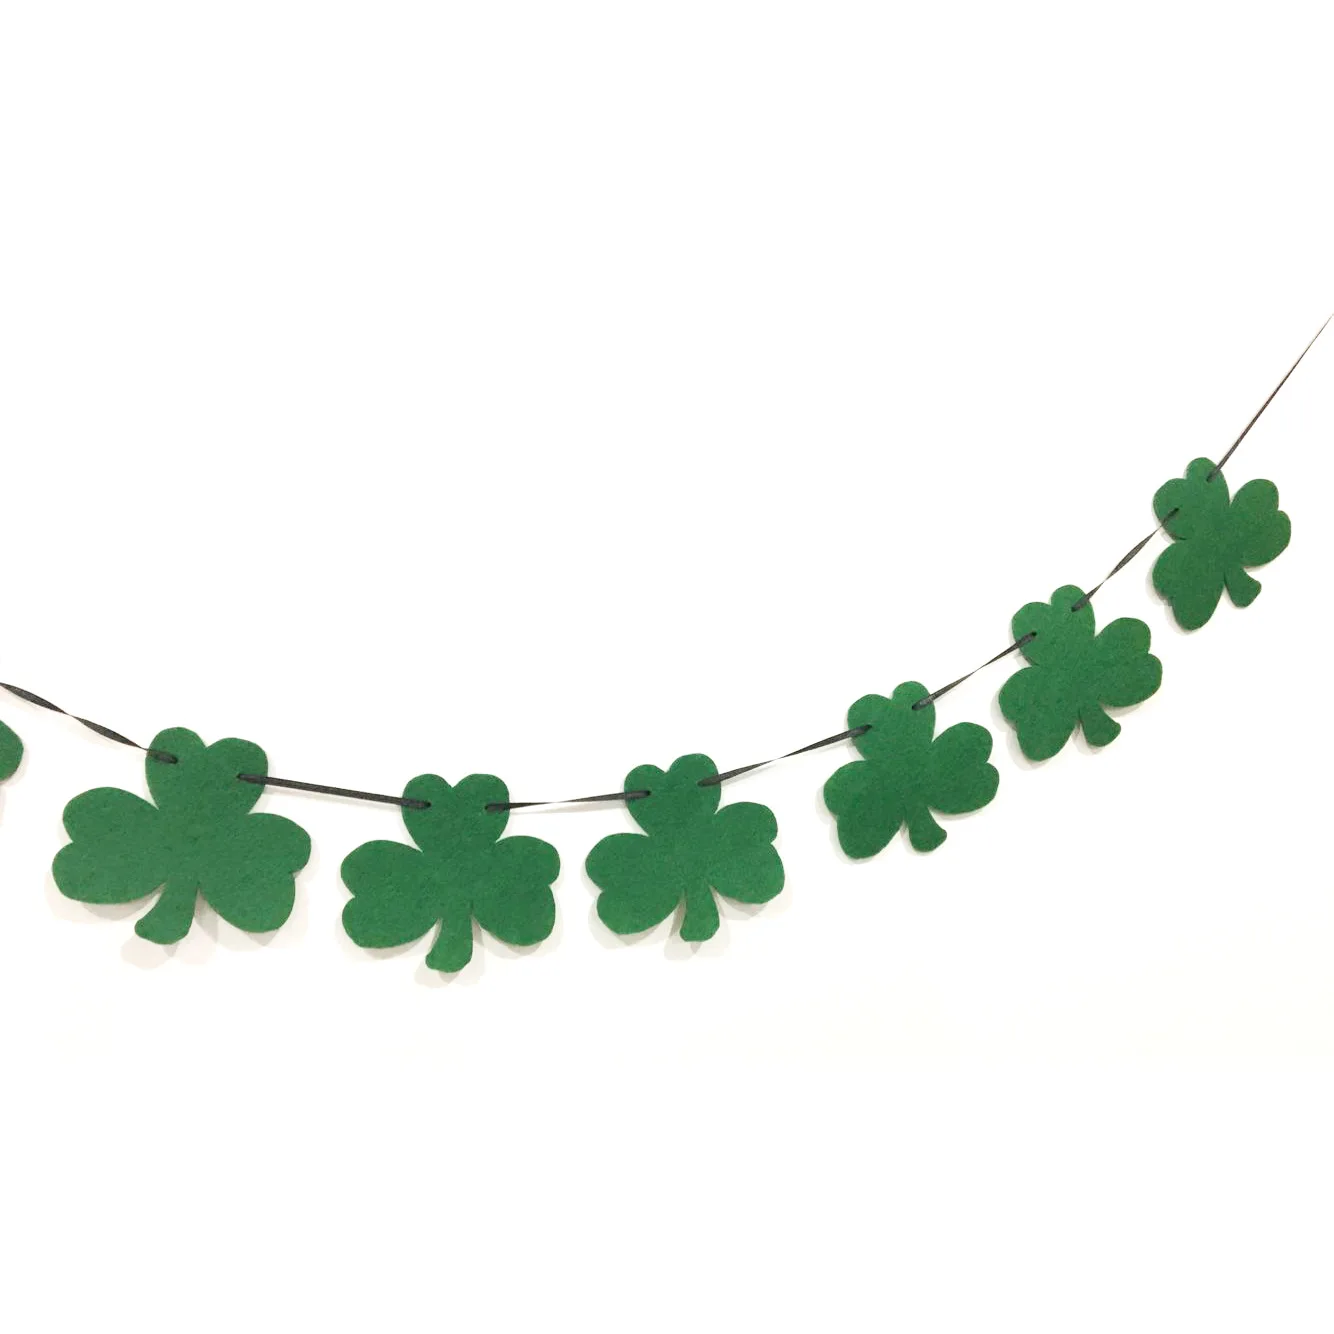 Patrick s Day Garland Decorations Patricks Day Decorations Sets Themed Hanging Welcome Sign and 2 Strings of Felt Shamrock Clover Garland Banner- St St Patrick s Day Banner Decor St 